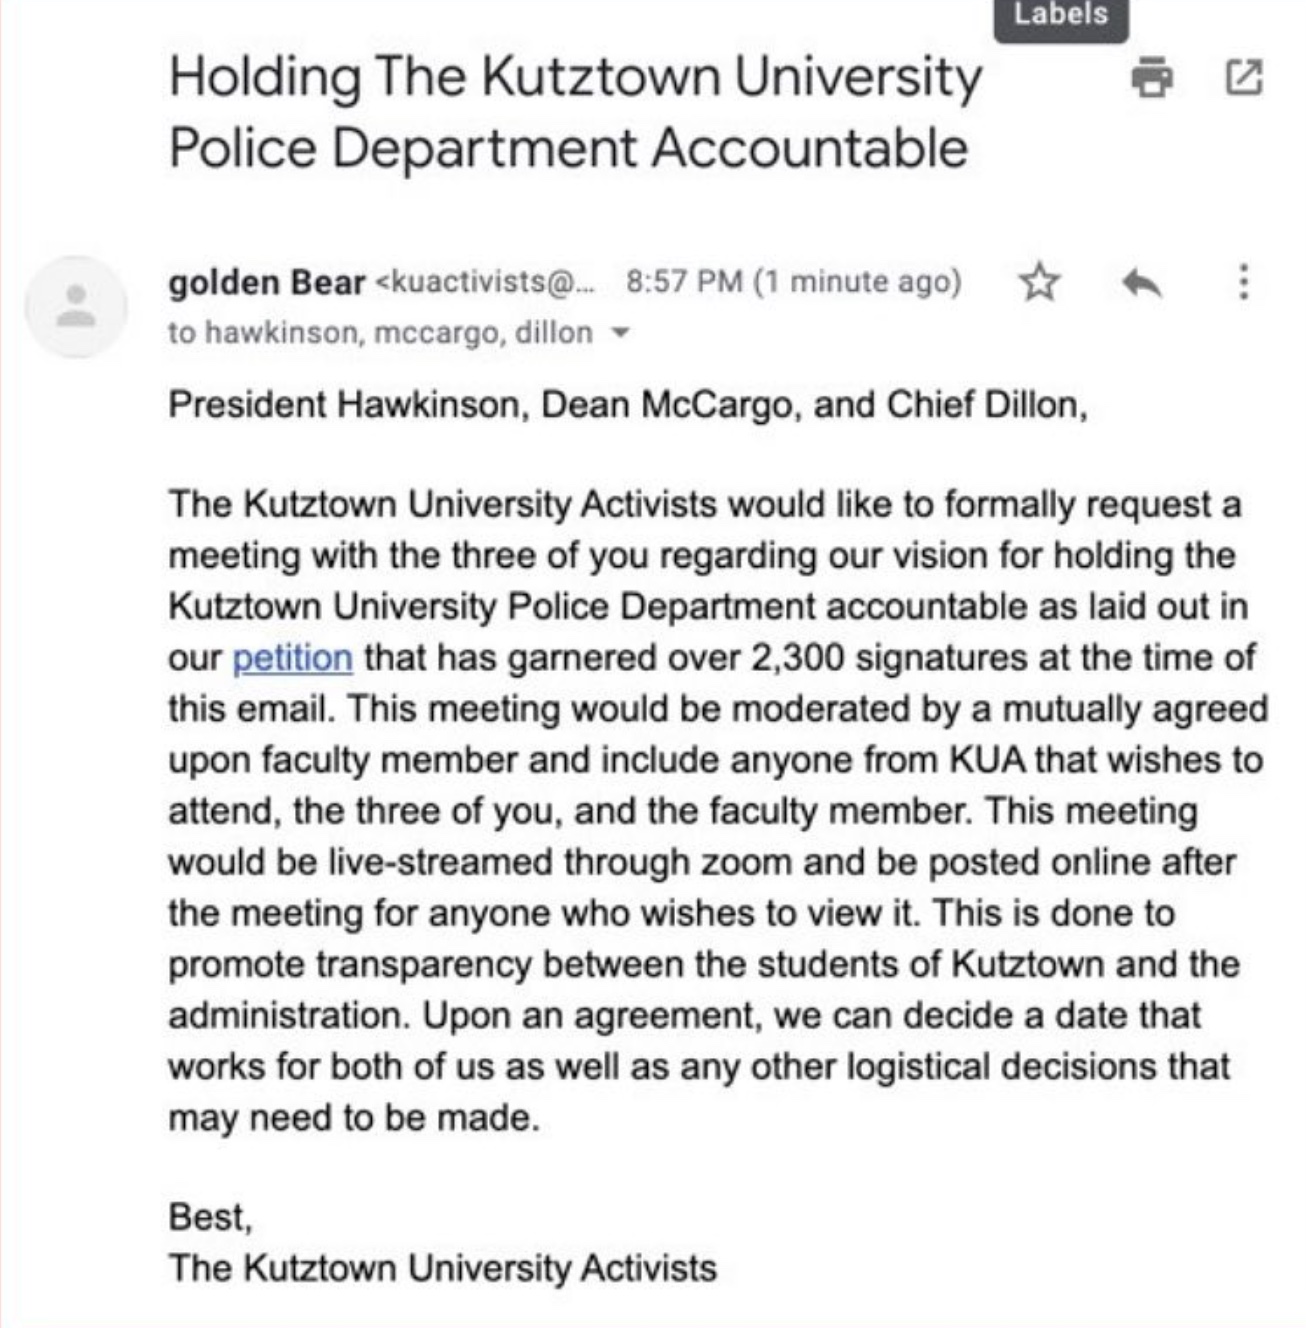 Screenshot of email sent by KUA to KU president, dean, and police chief. Title: Holding The Kutztown University Police Department Accountable. The Kutztown University Activists would like to formally request a meeting with the three of you regarding our vision for holding the Kutztown University POlice Department accountable as laid out in our petition that gas garnered over 2,300 signatures at the time of this email. This meeting would be moderated by a mutually agreed upon faculty member and include anyone froim KUA that wishes to attend, the three of you, and the faculty member. This meeting would be live-streamed through zoom and be posted online after the meeting for anyone who wishes to view it. This is done to promote transparency between the students of Kutztown and the administration. Upon an agreement, we can decide a date that works for both of us as well as any other logistical decisions that may need to be made.